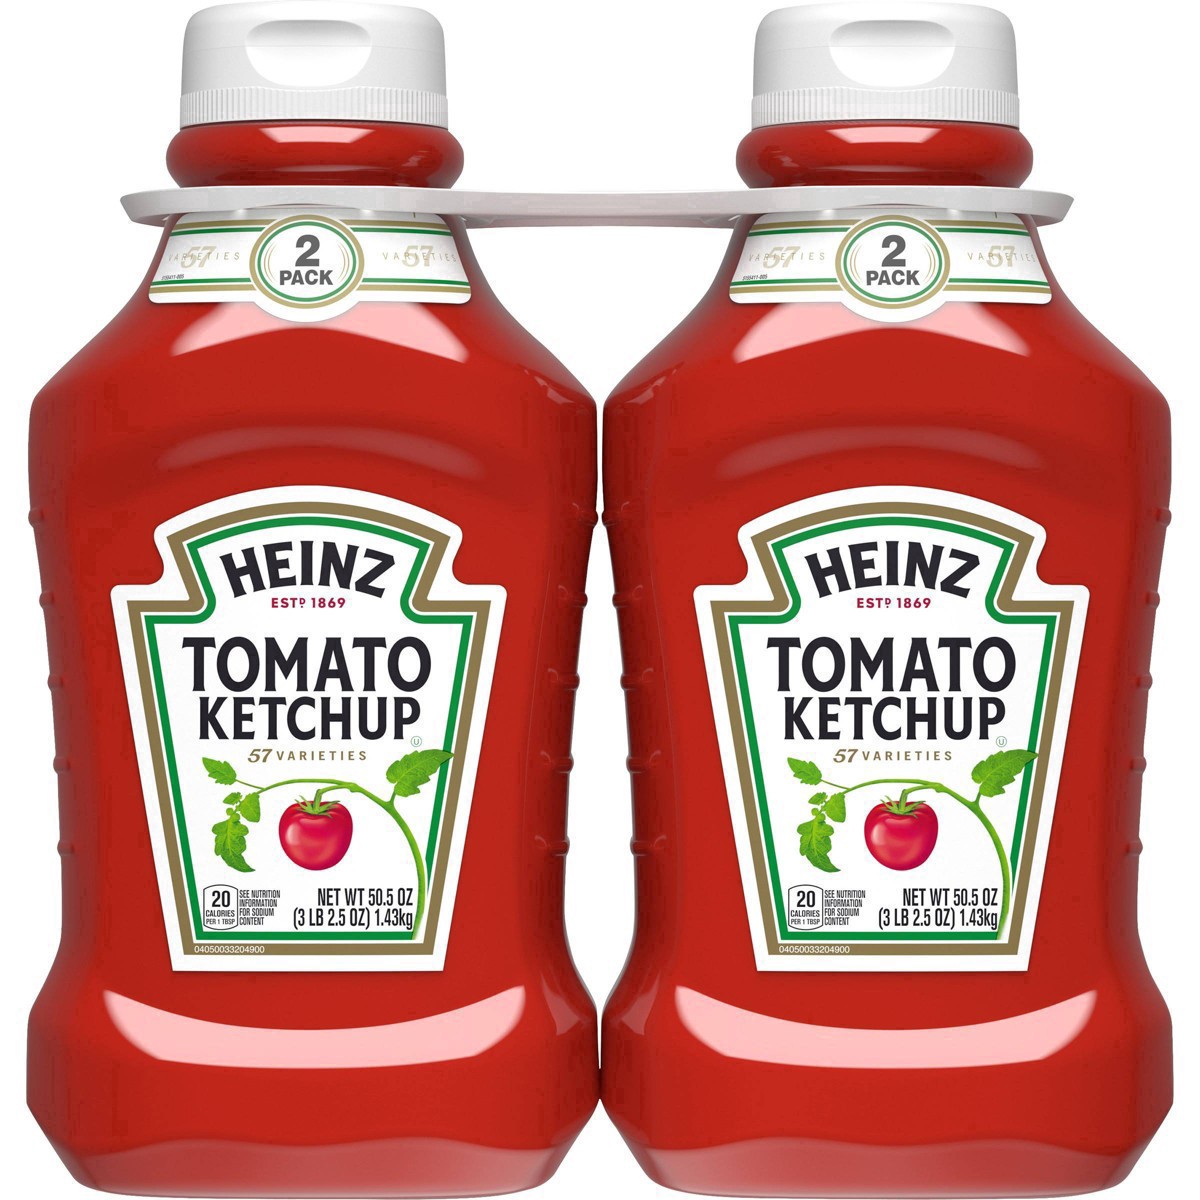 slide 61 of 127, Heinz Tomato Ketchup Pack, 2 ct; 50.5 oz